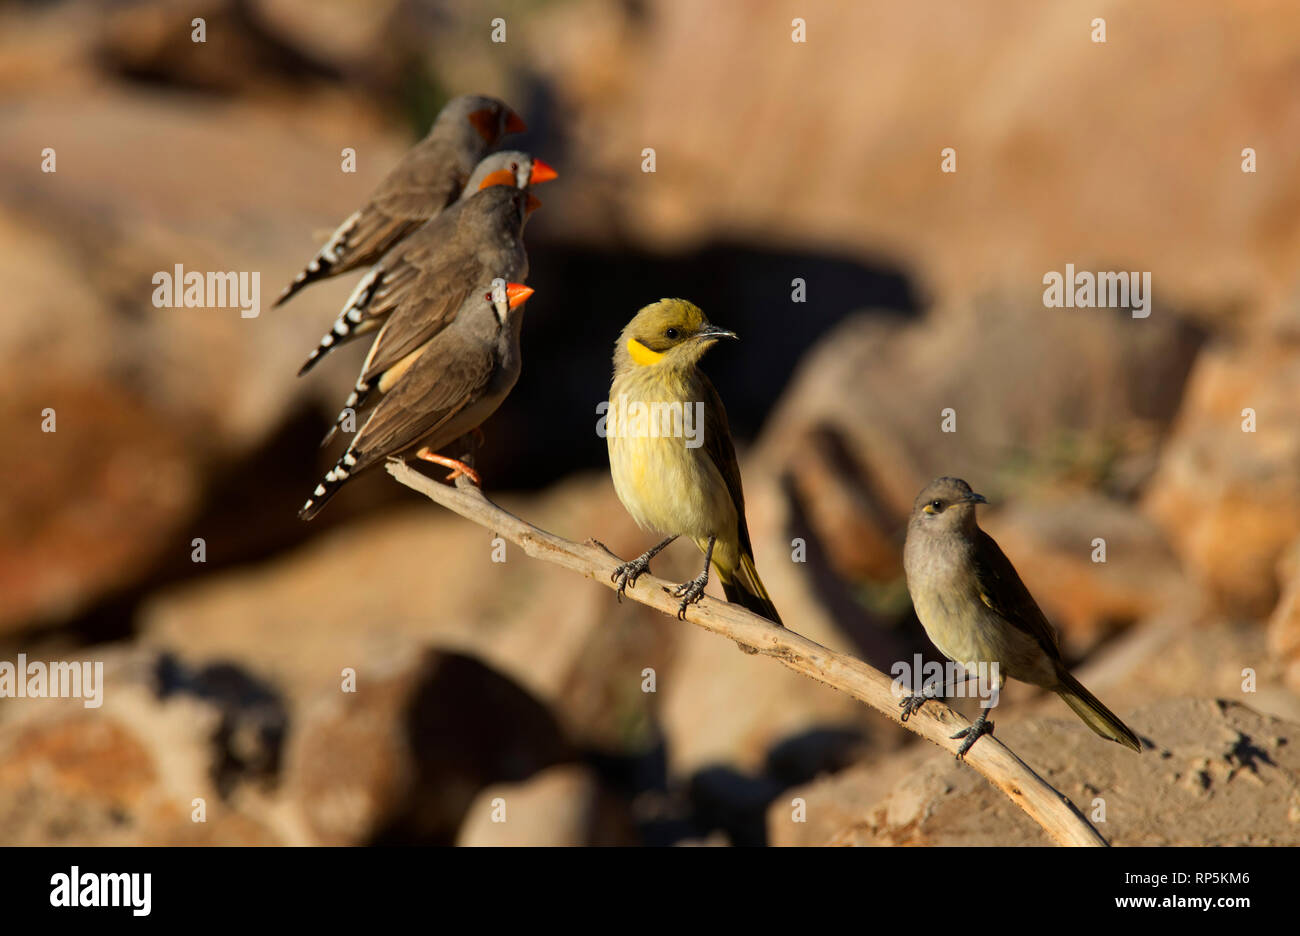 A Grey-fronted Honeyeater, Lichenostomus plumulus,  near Mount Isa, Western Queensland, with zebra finches and a brown honeyeater sharing a perch near Stock Photo